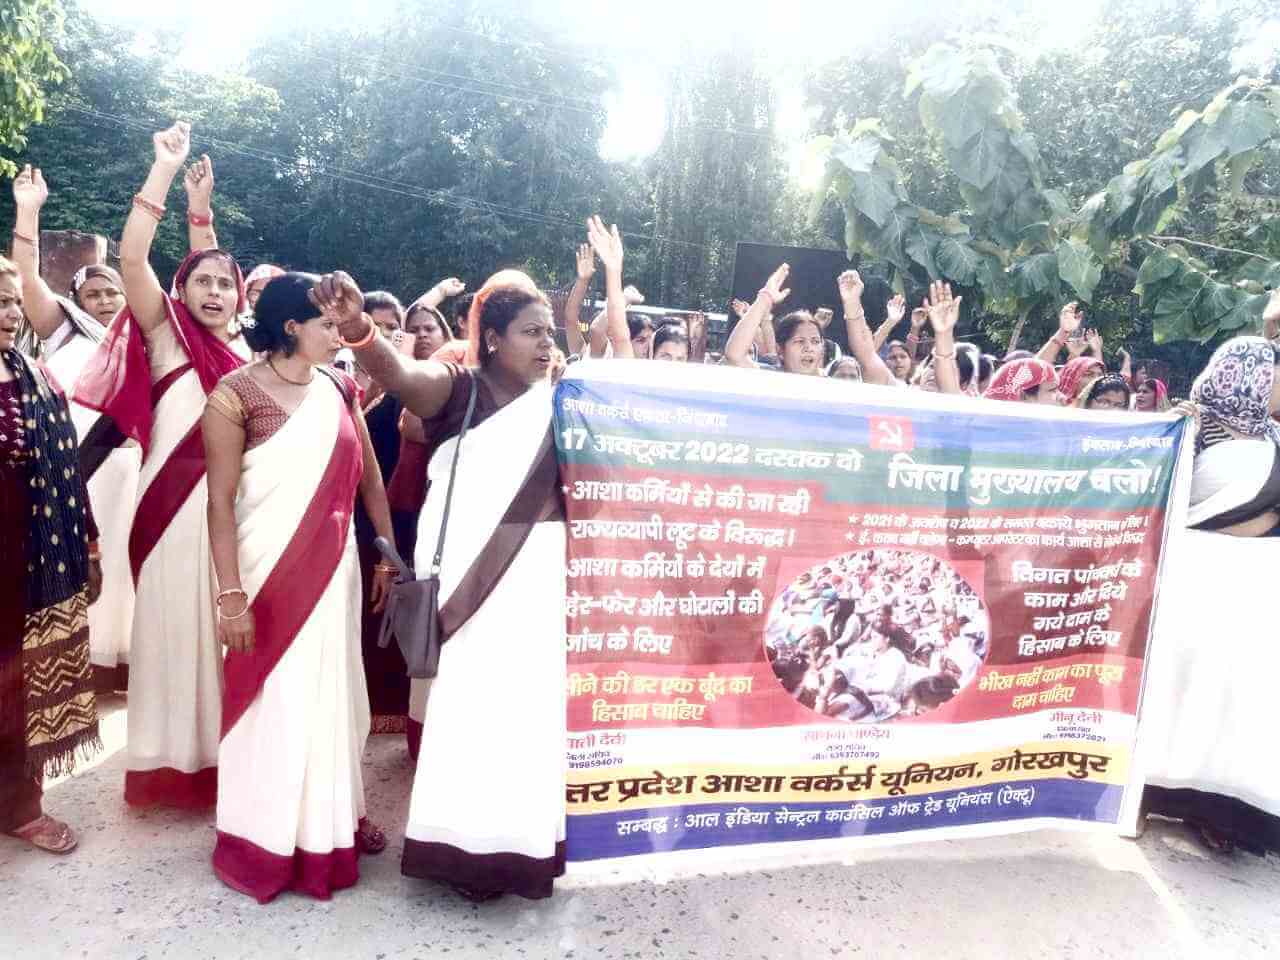 Asha workers movement is getting faster